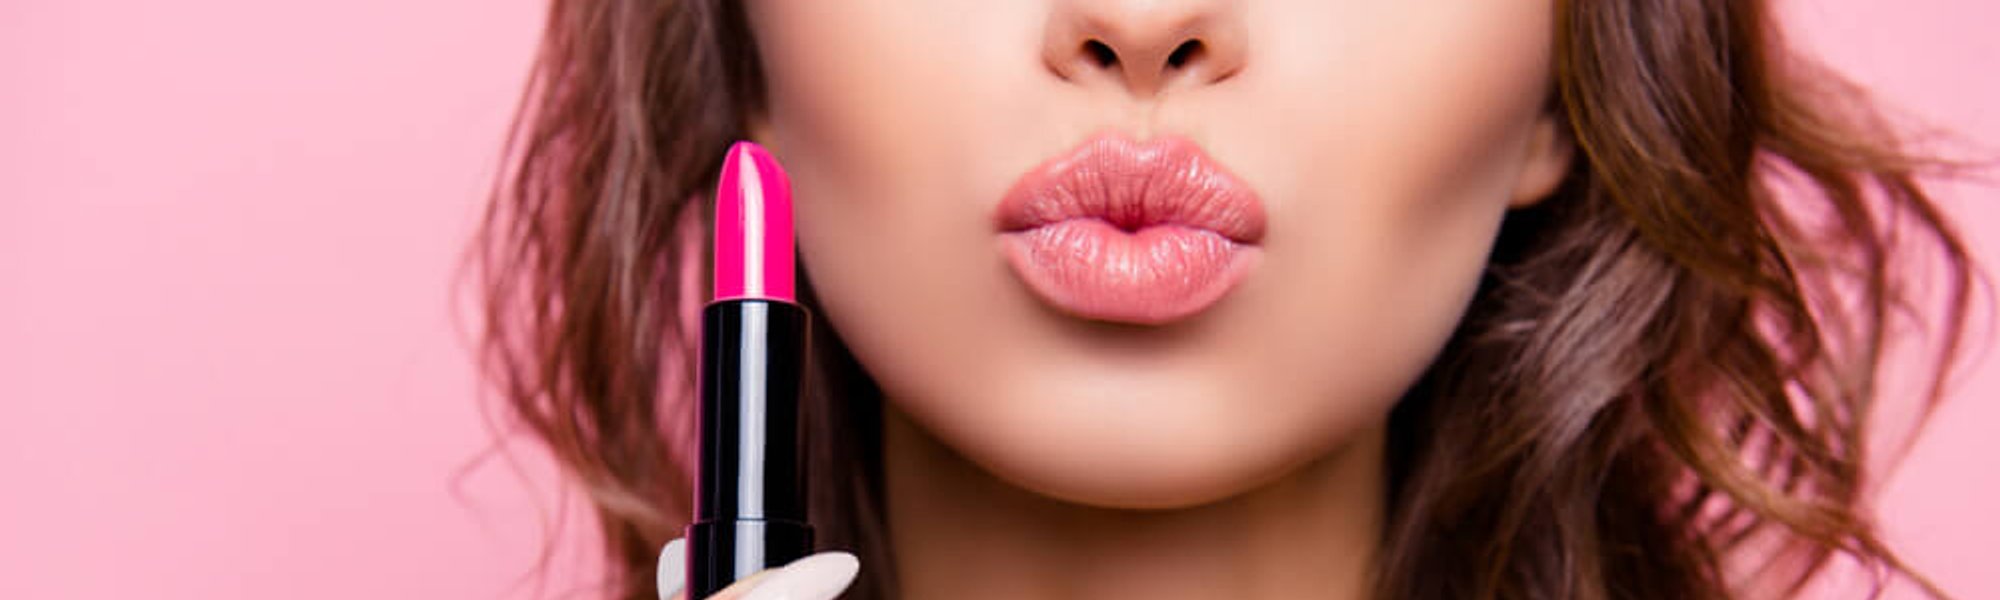 Woman air kiss with lipstick